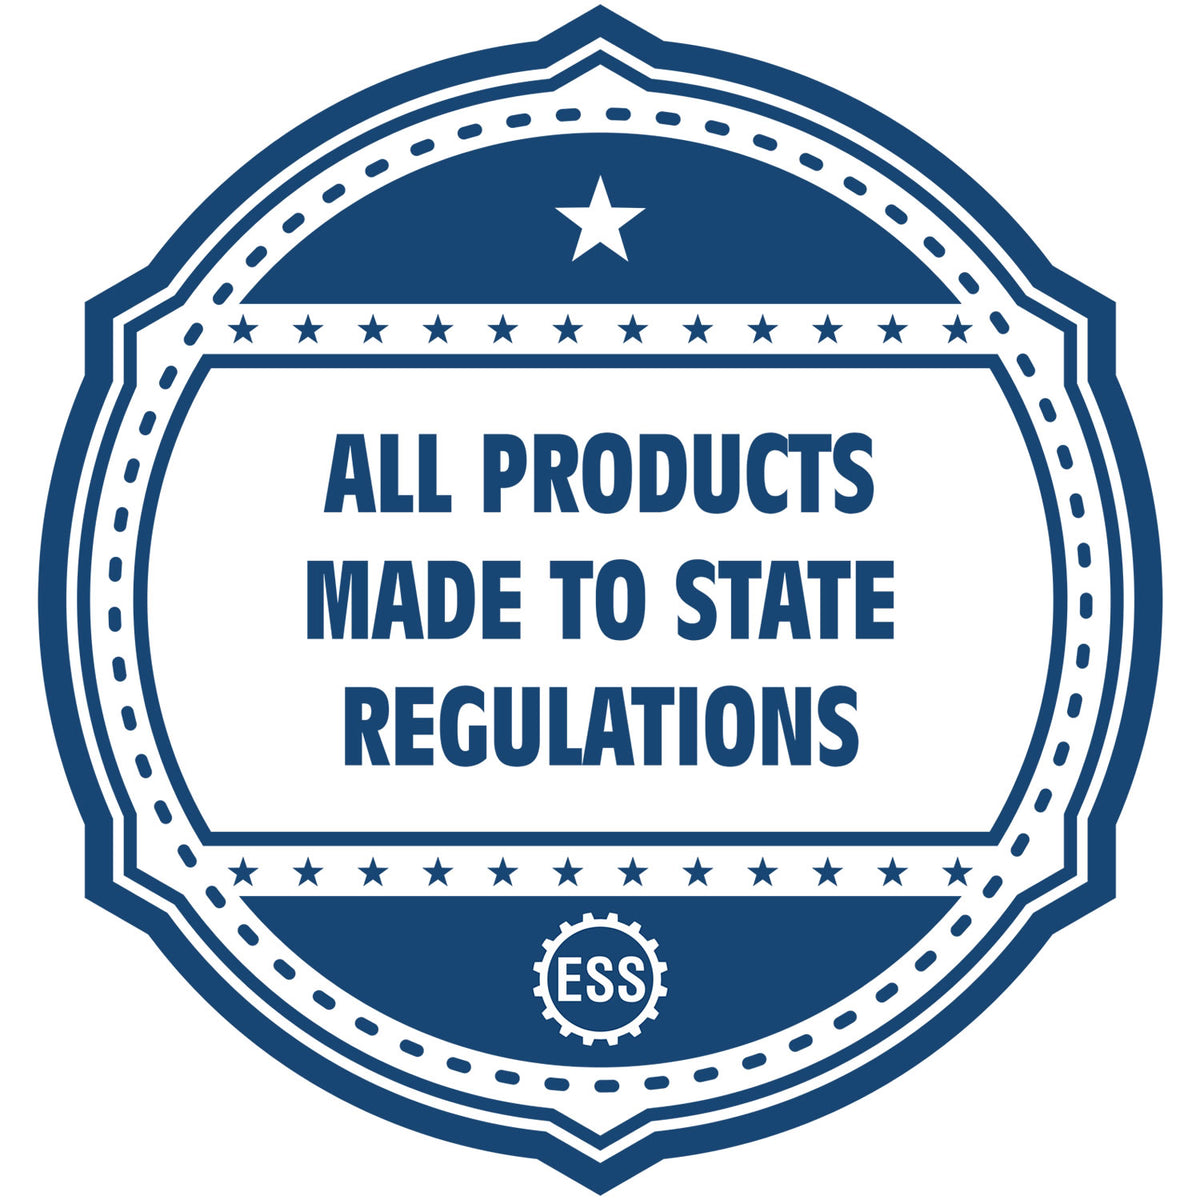 An icon or badge element for the Slim Pre-Inked Arizona Professional Engineer Seal Stamp showing that this product is made in compliance with state regulations.